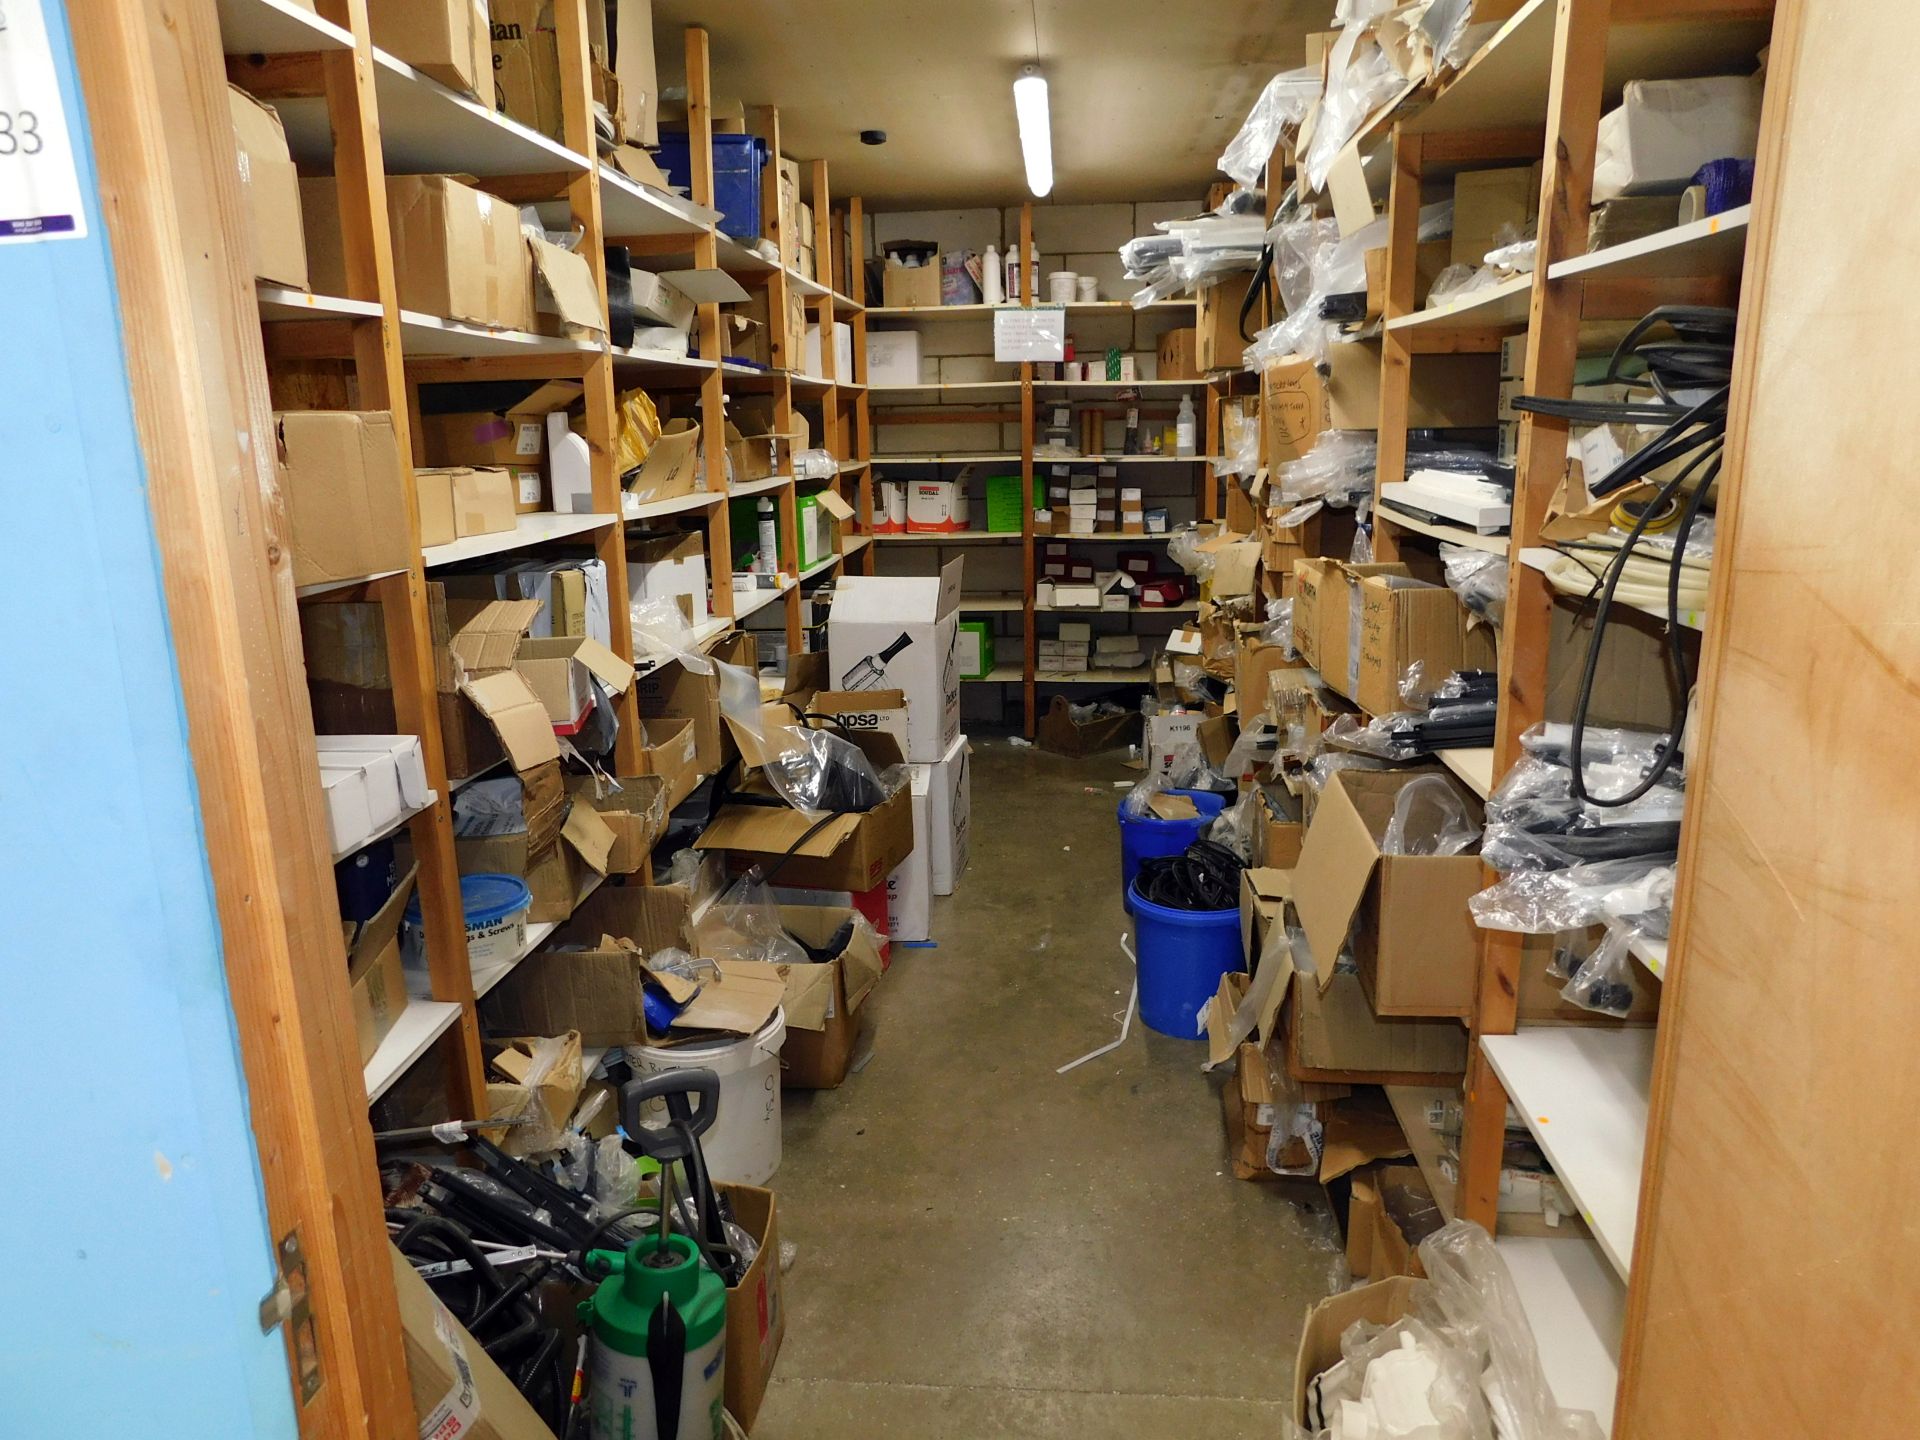 Contents of Room of Assorted Mastics, Screws, Consumables Etc (Location: Bedford. Please Refer to